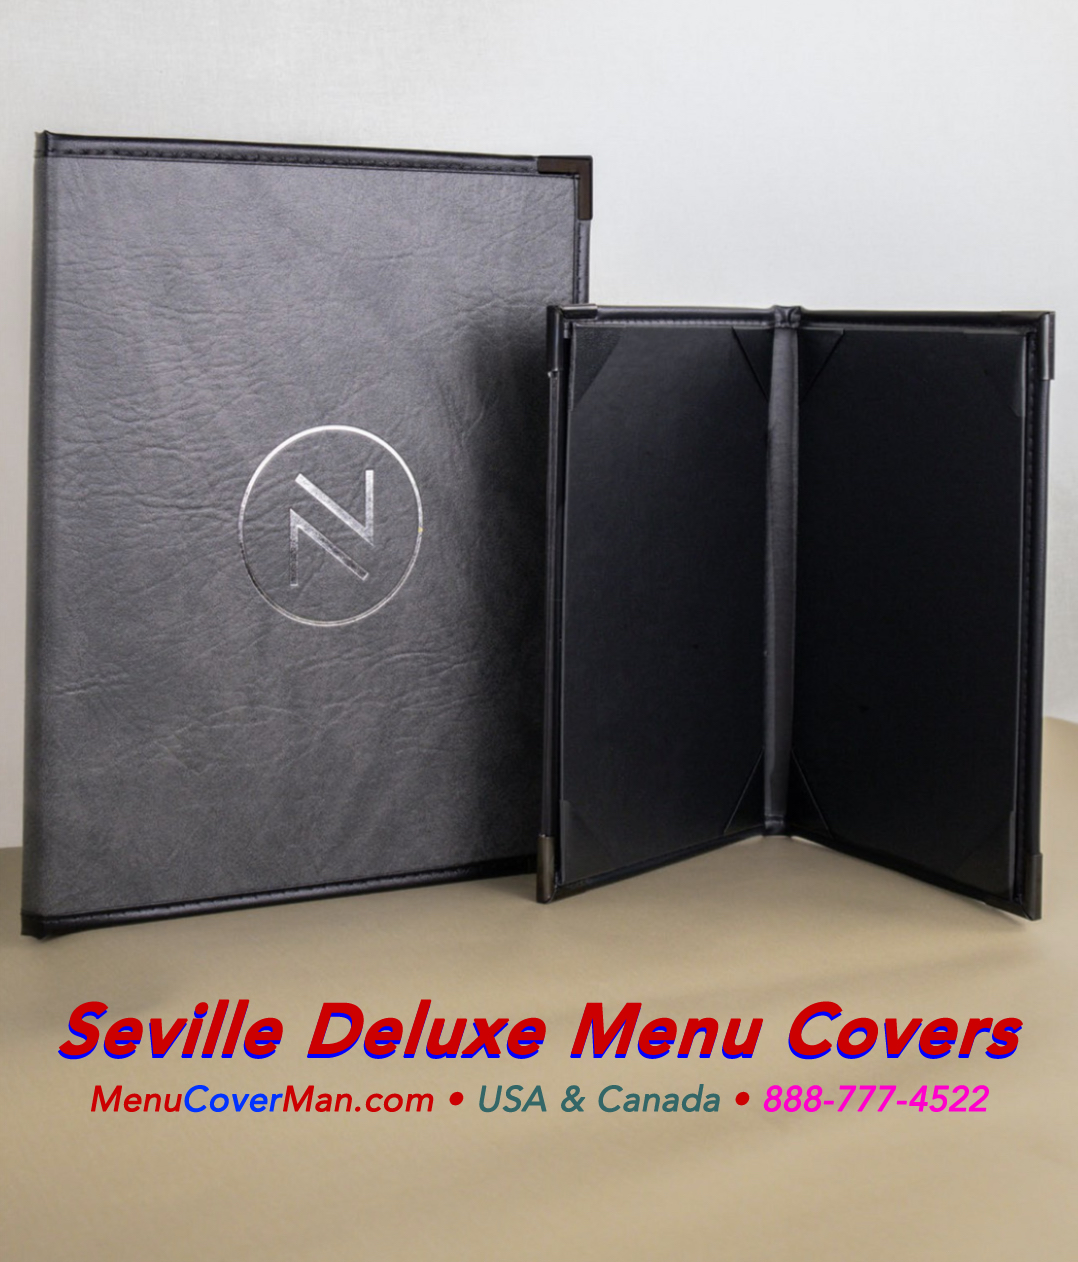 Seville Deluxe Menu Jackets. MenuCoverMan.com USA & Canada Daily Deliveries.